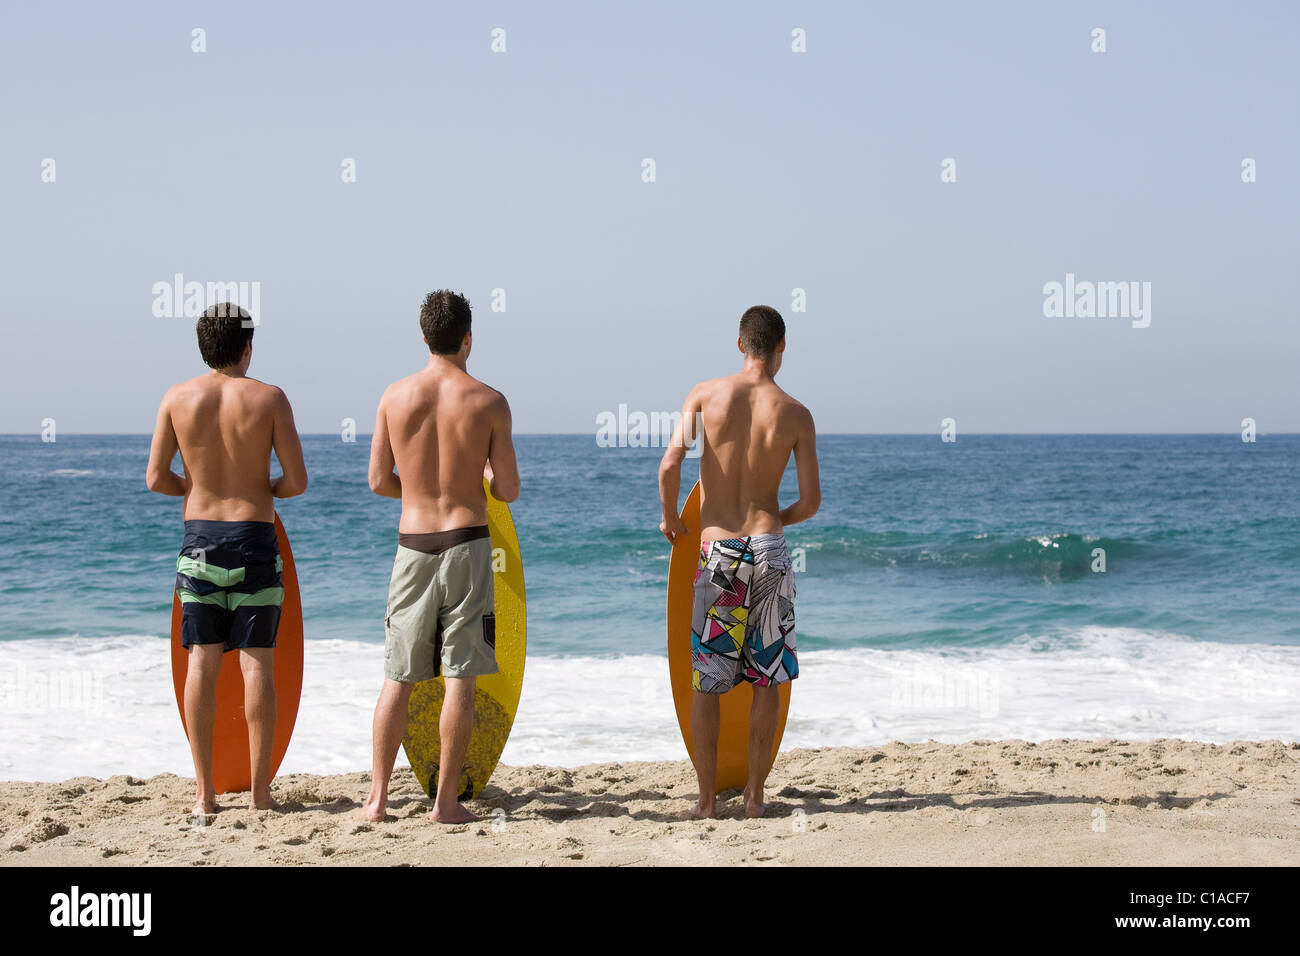 Three young men on beach with surfboards Stock Photo